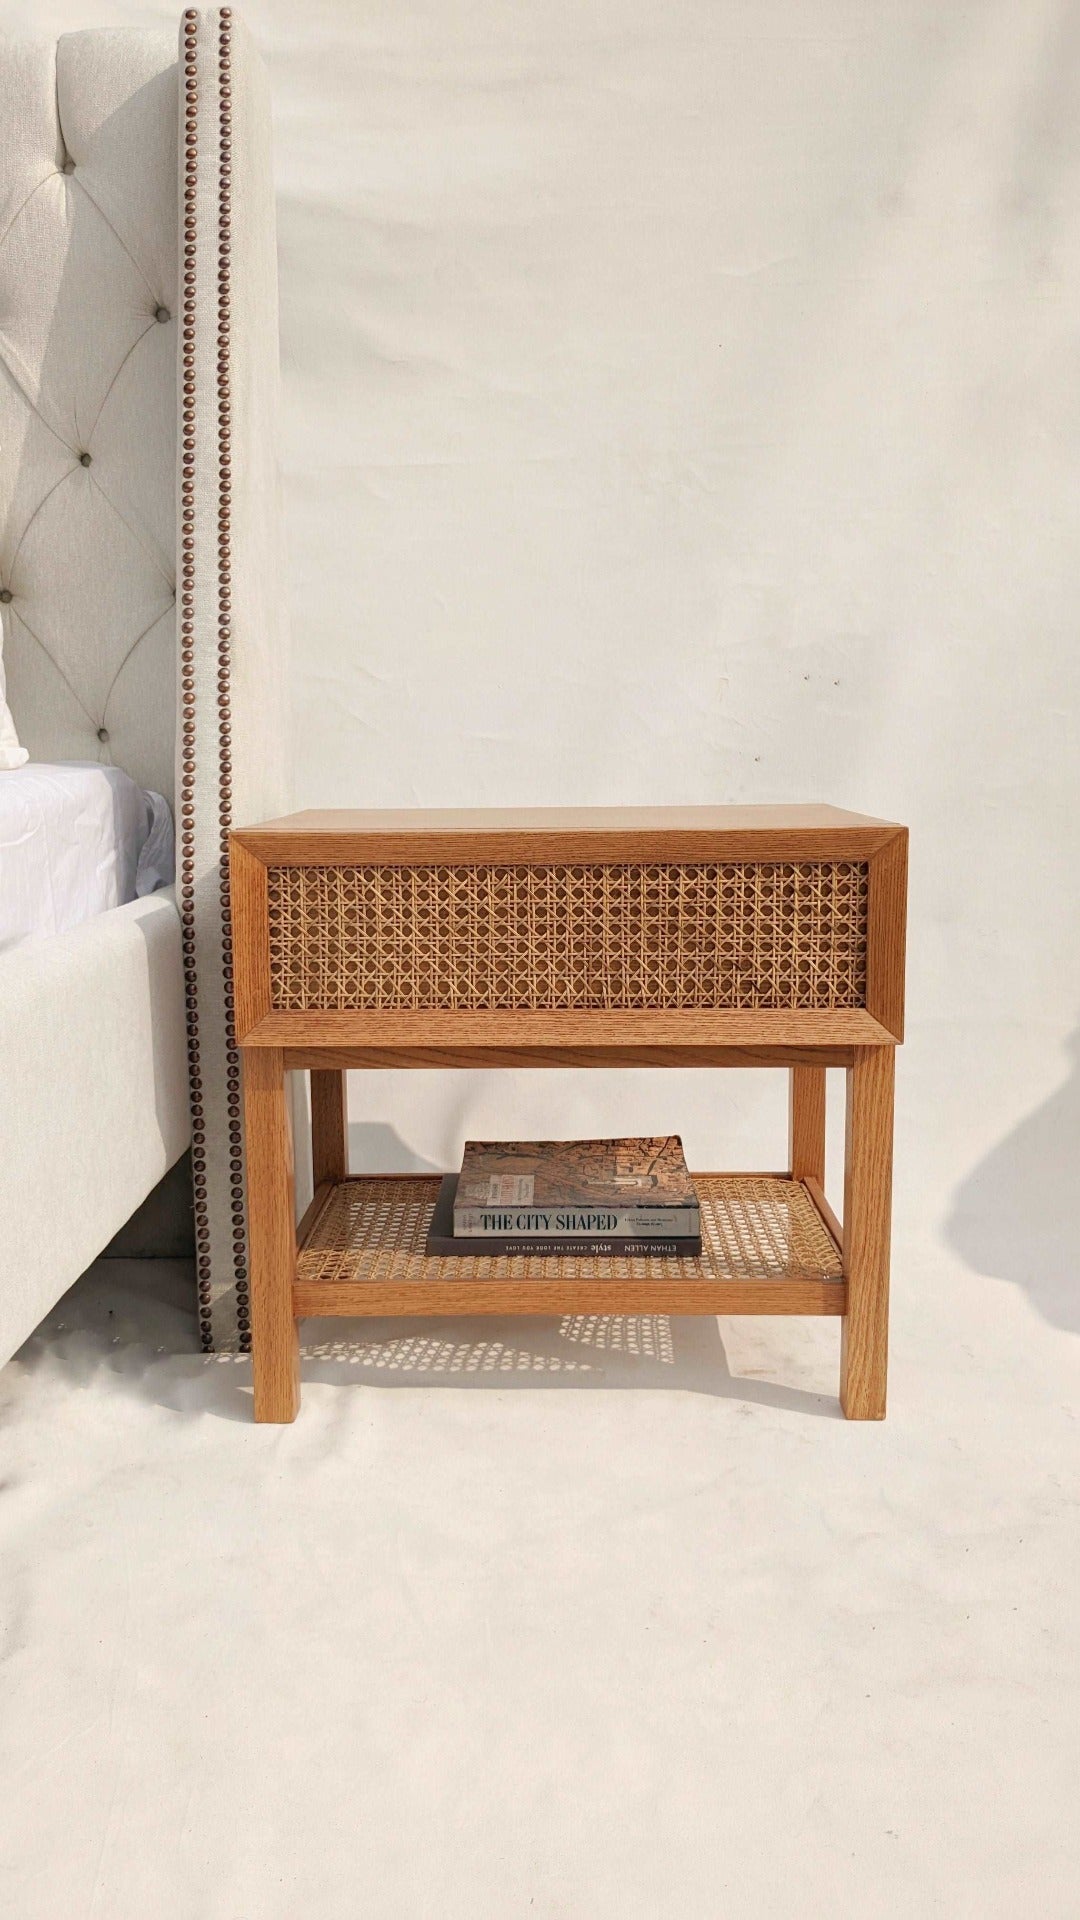  A nightstand with a cane-woven drawer front, offering a stylish storage solution with a touch of natural texture. The woven cane detailing adds visual interest and warmth to the room, while the sleek design ensures functionality and versatility.